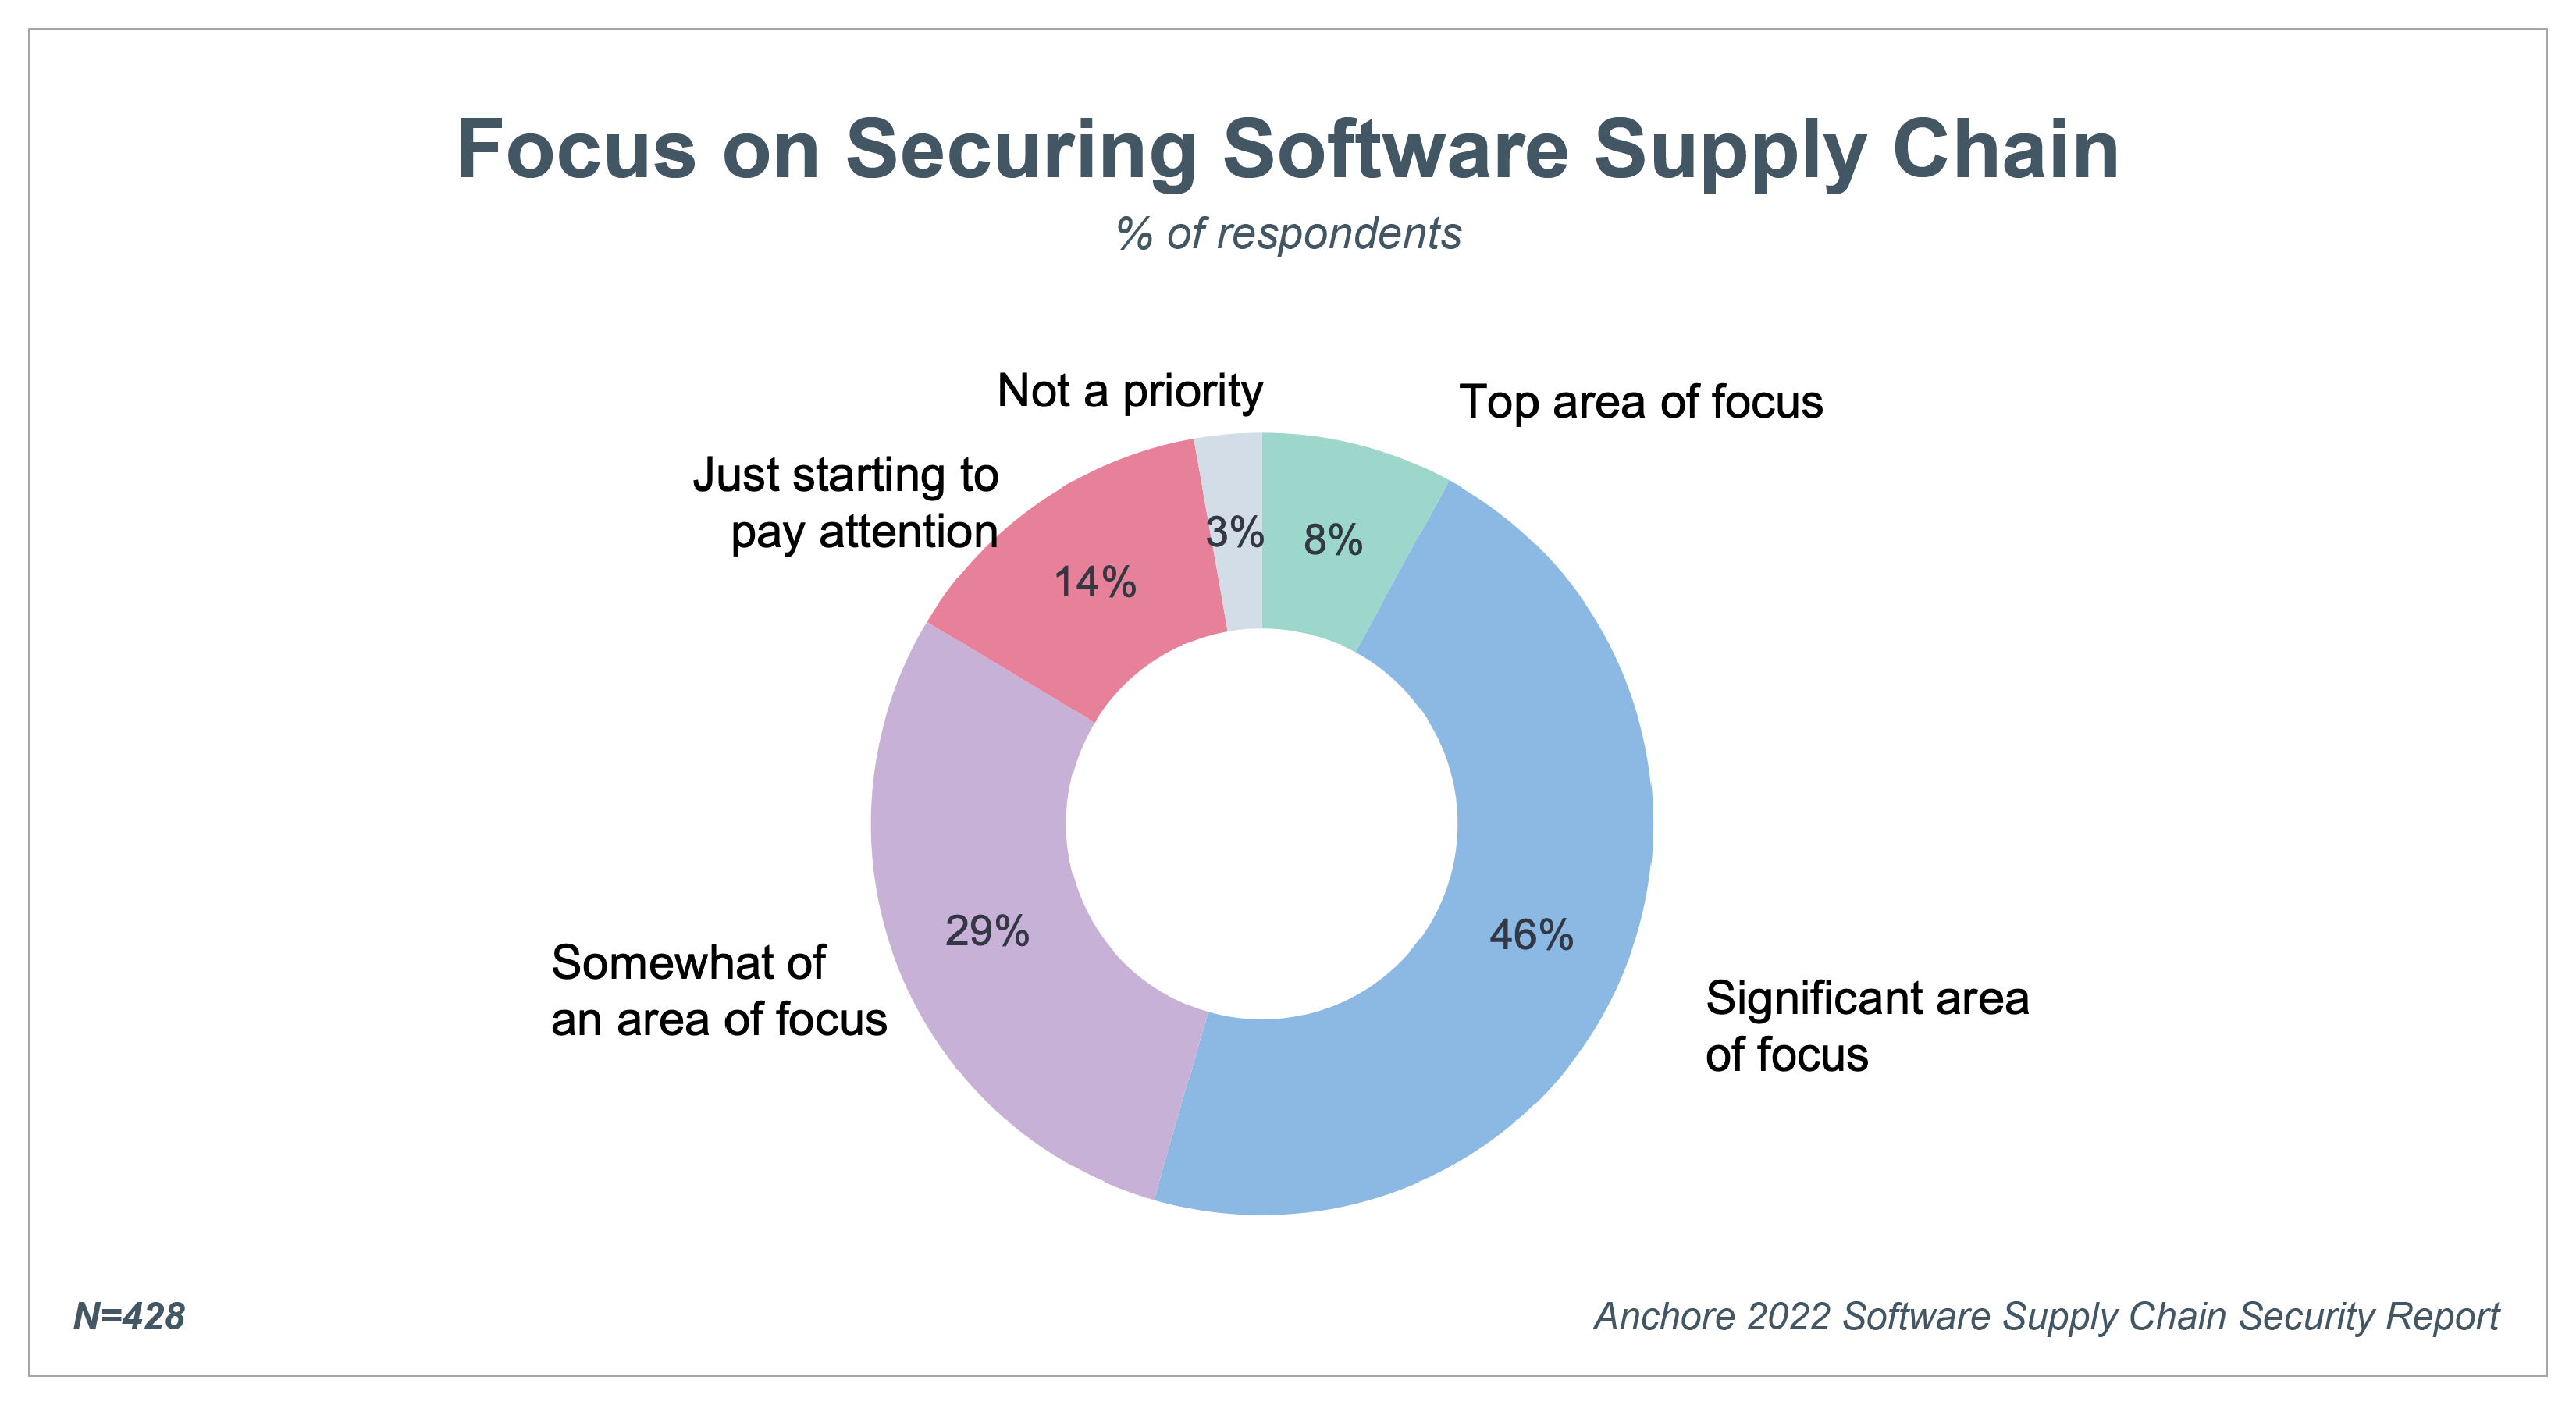 pie chart showing organizations focusing on securing the software supply chain